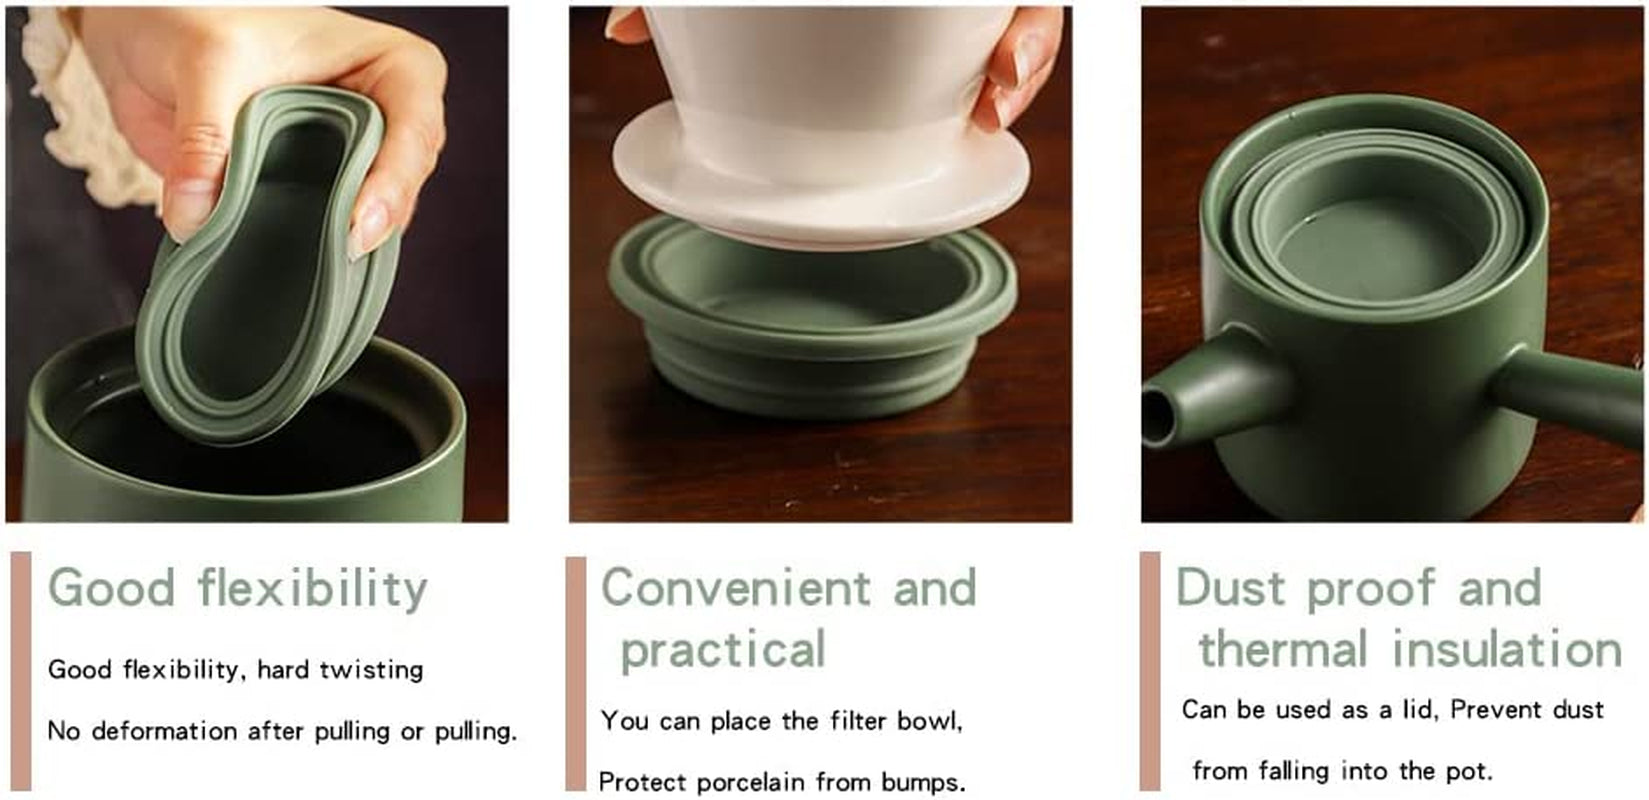 Premium Ceramic Pour Over Coffee Set in Green - Classic Design with Comfort Handle for Rich, Flavorful Coffee - About Brew